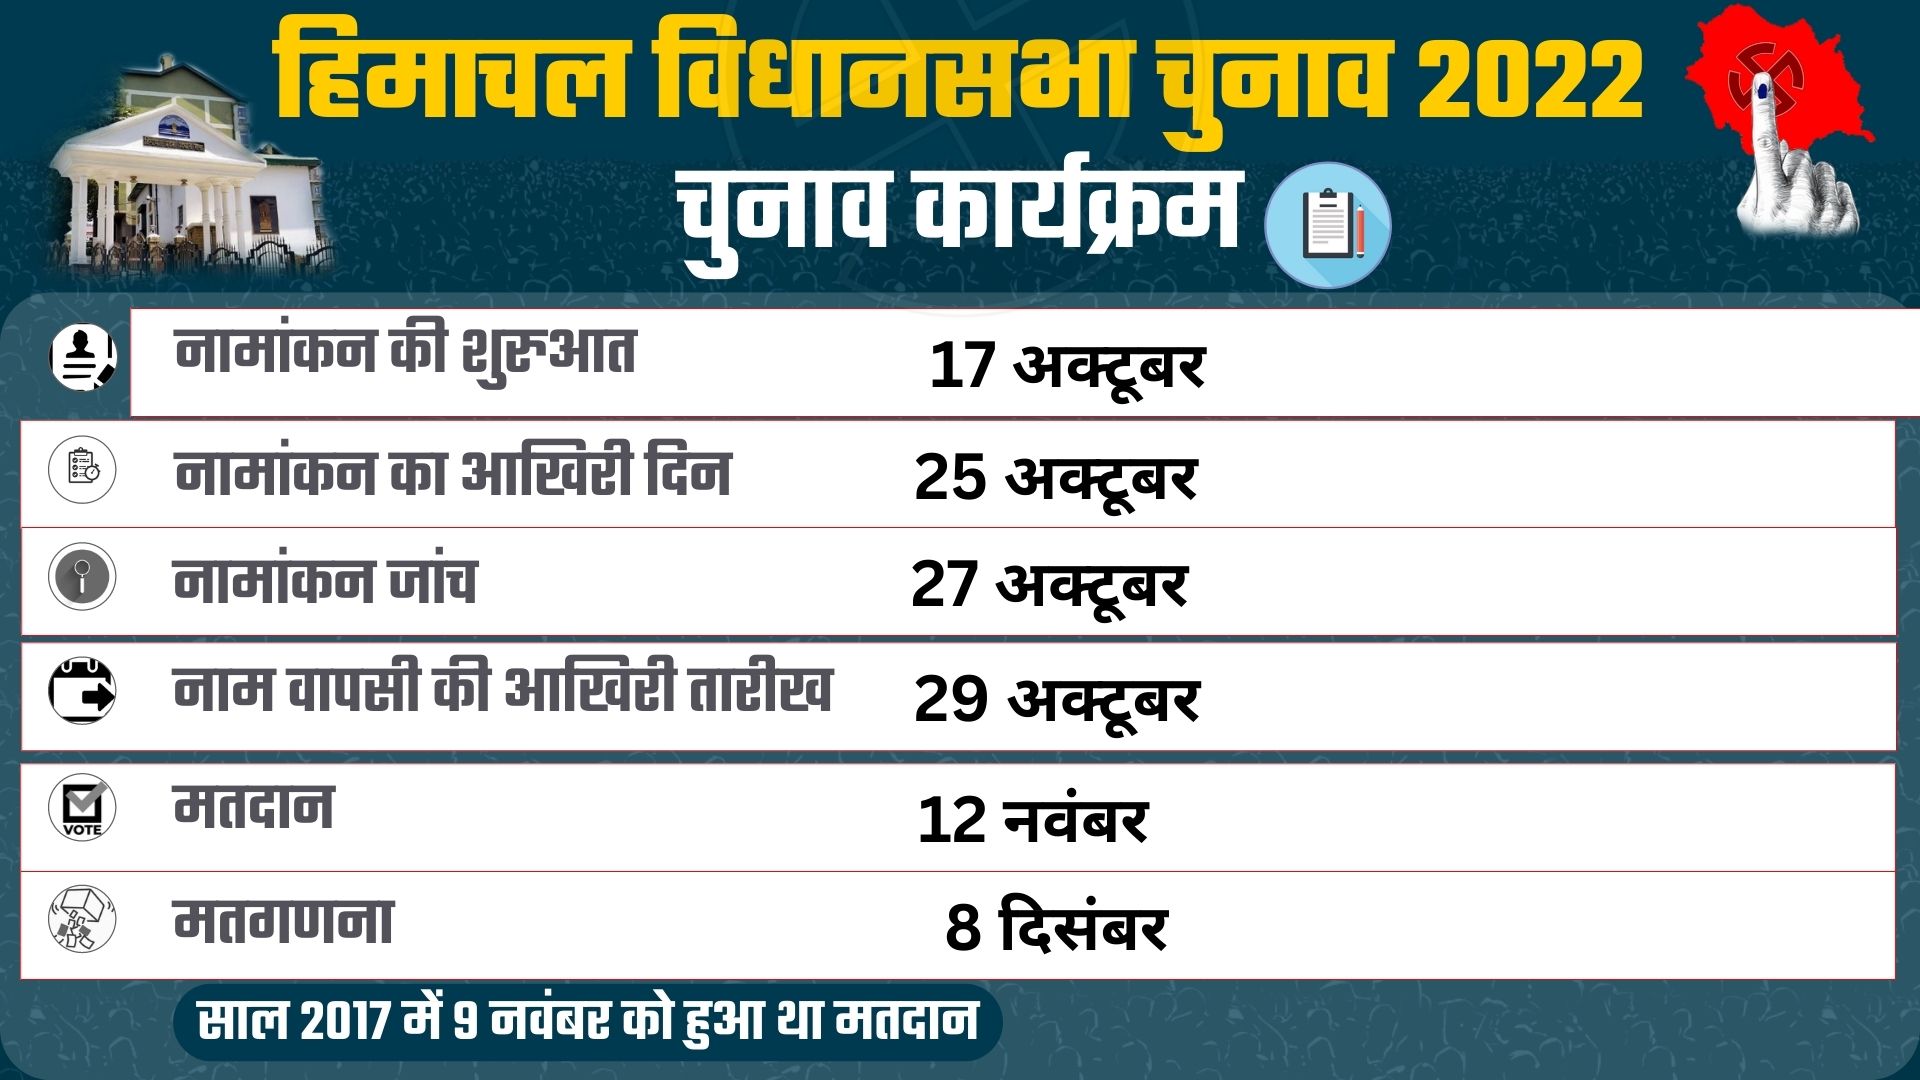 Himachal Pradesh Assembly Elections 2022